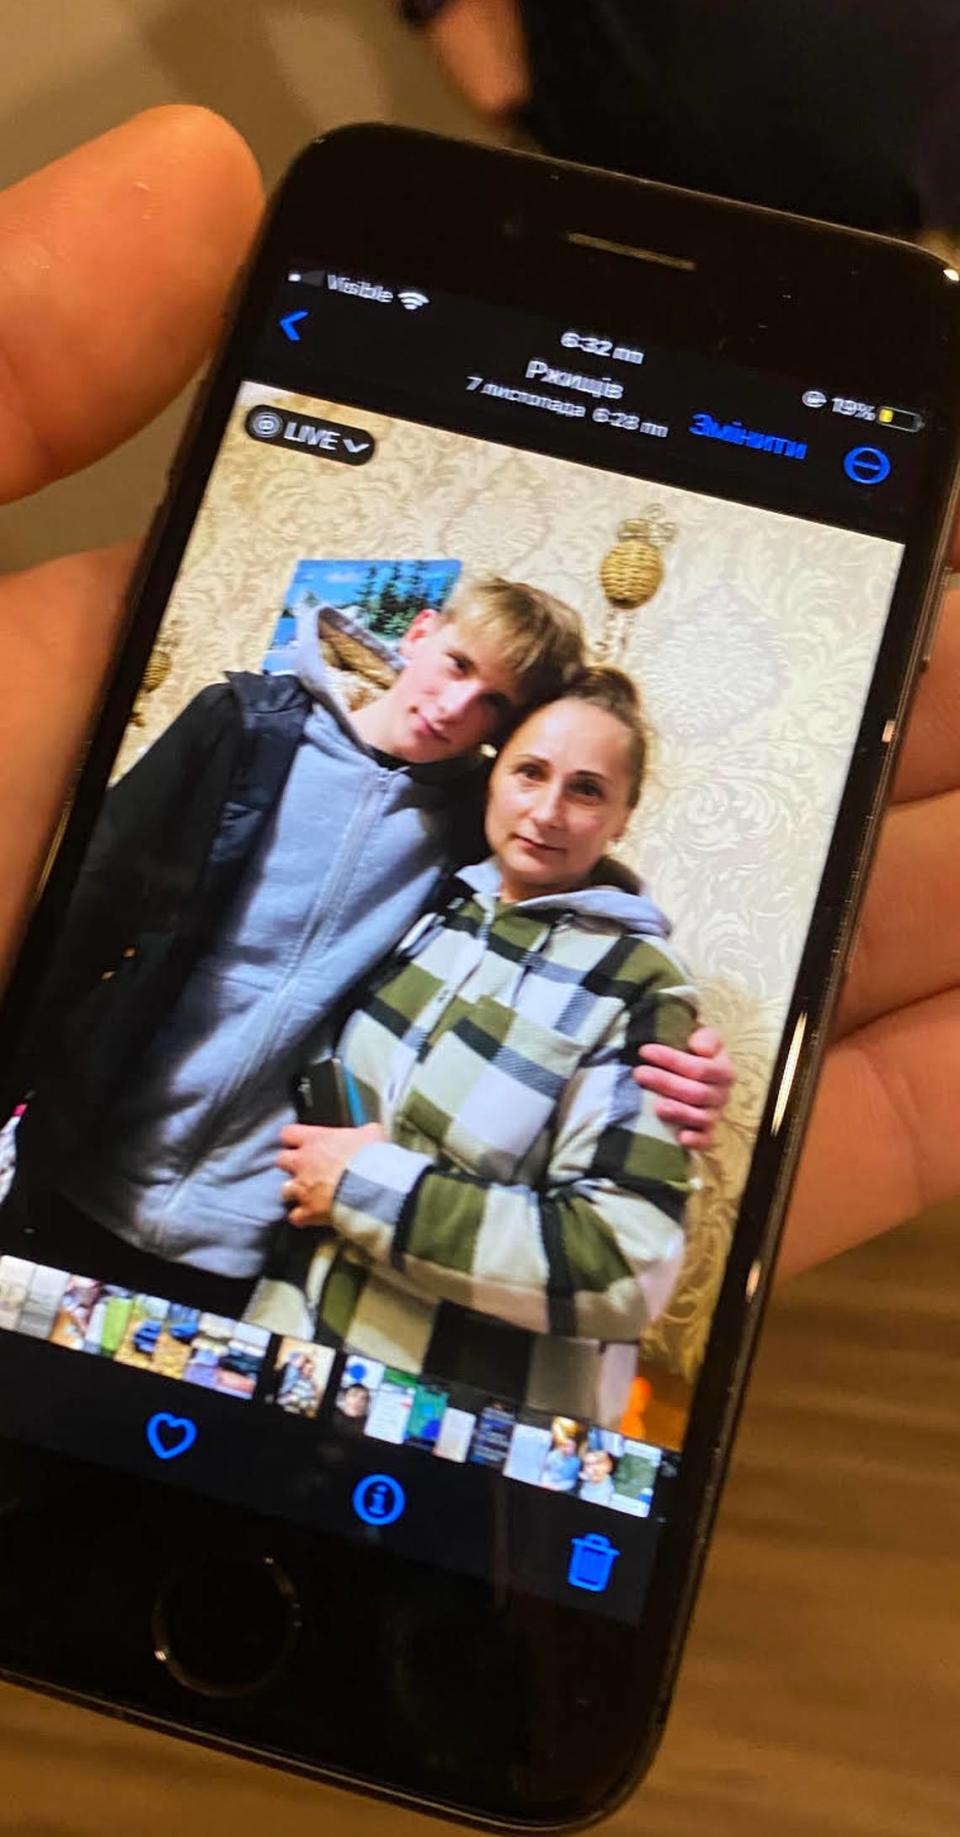 Vlad Horokhov shows a picture of his mother, who lives under constant drone attack in the Ukrainian city Rzhyschiv. Horokhov, 20, came to Raleigh two weeks ago fleeing the war at home, staying with a Russian political refugee.